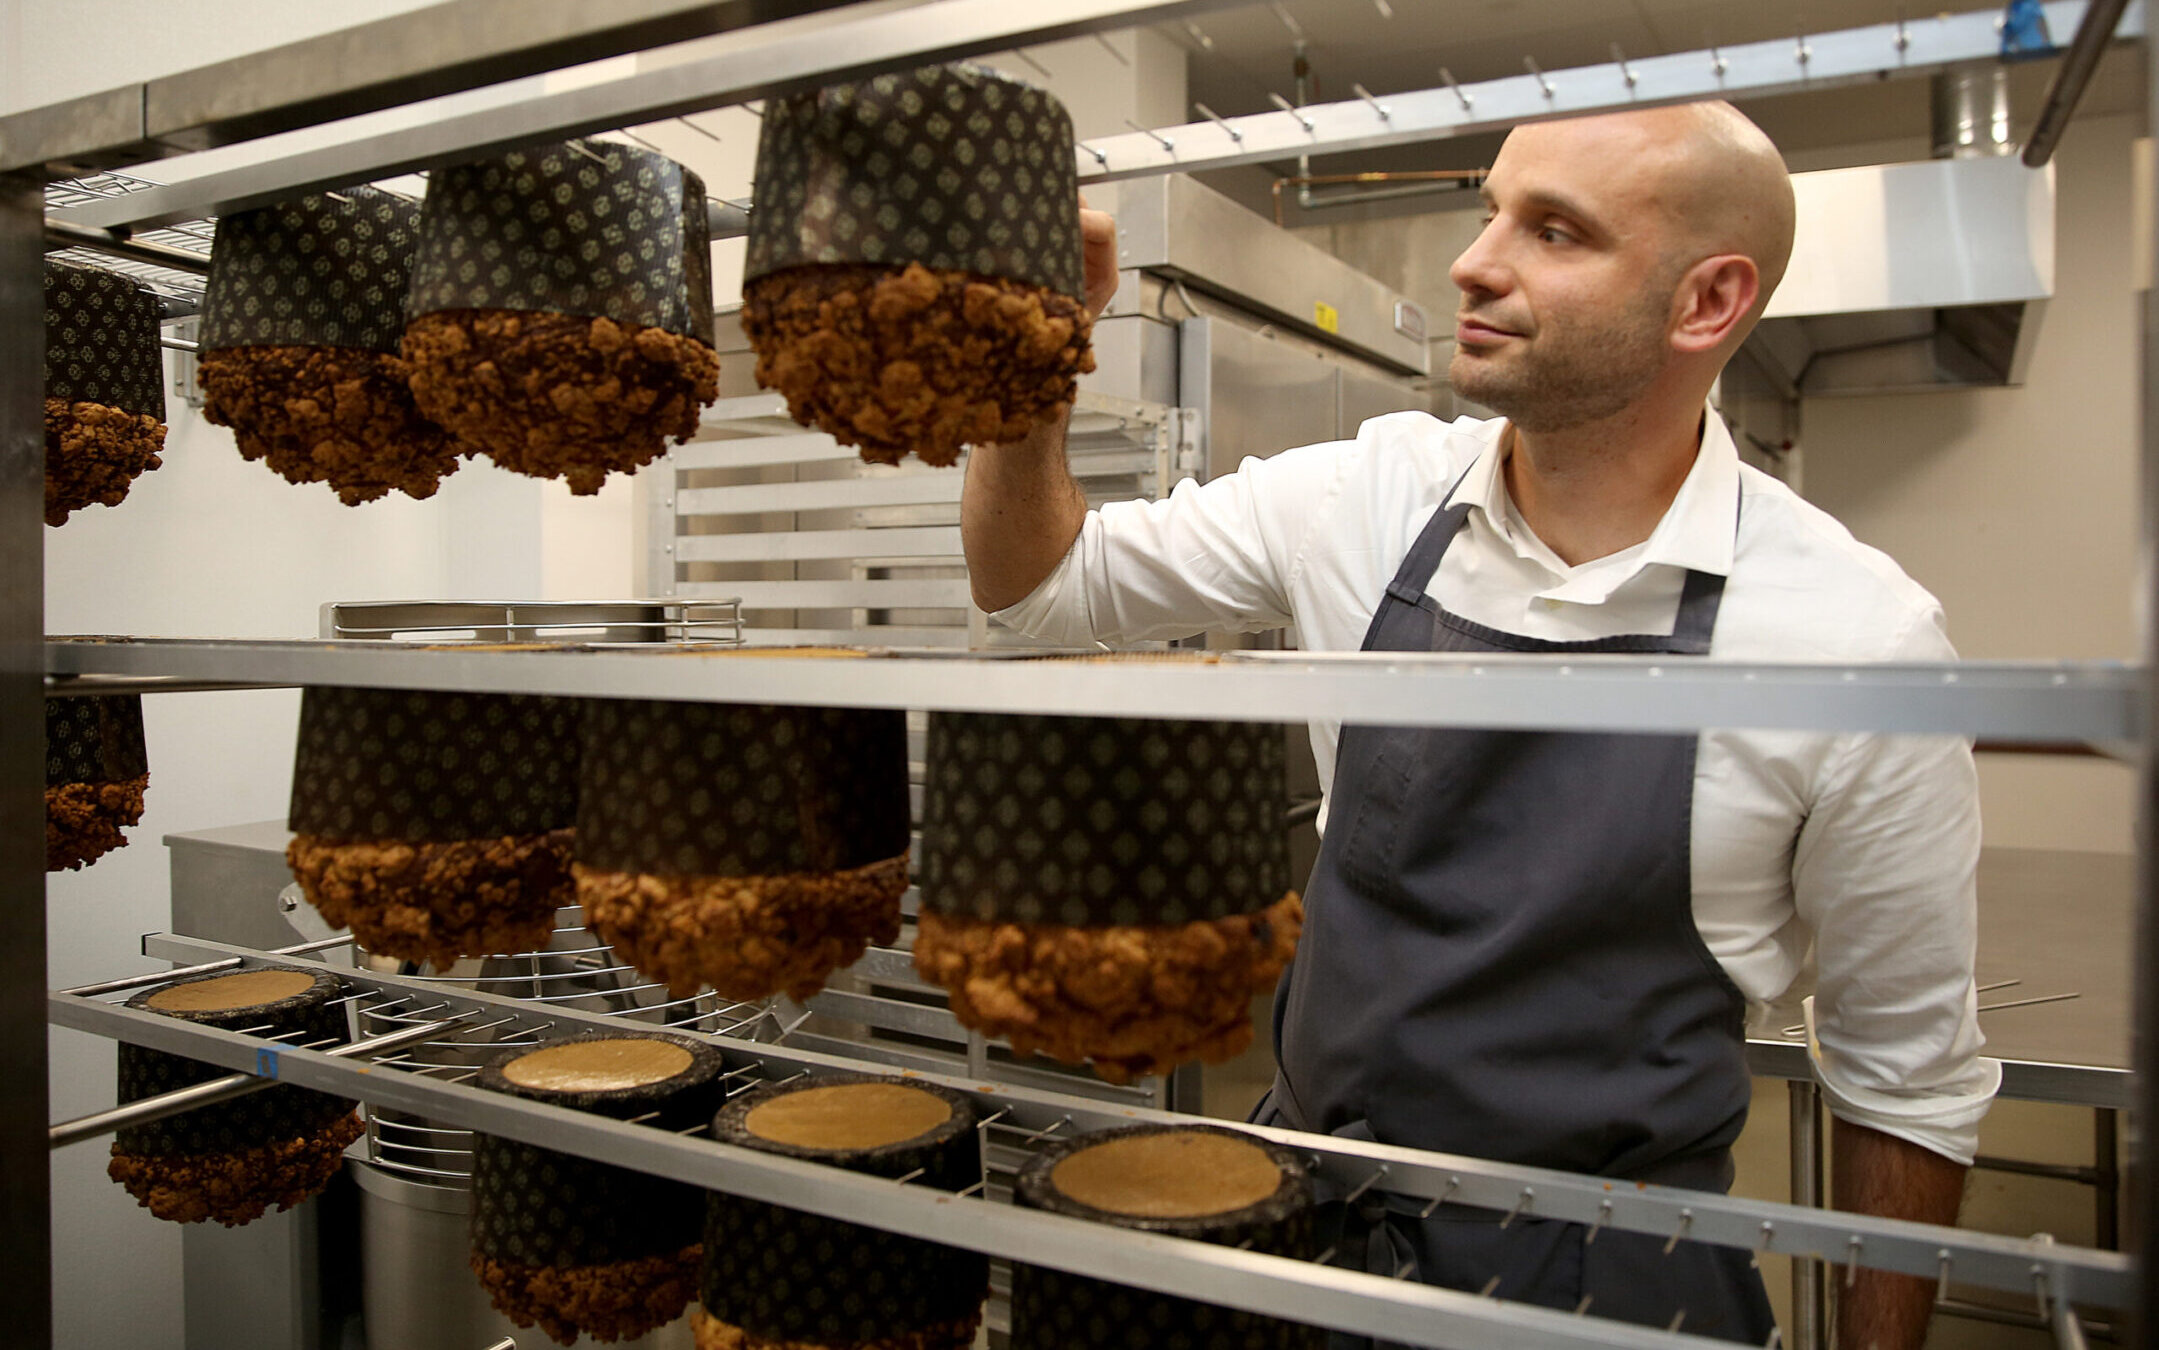 Chef Roy Shvartzapel checks the temperature of panettone just out of the oven in his Richmond, California, kitchen, in 2016.